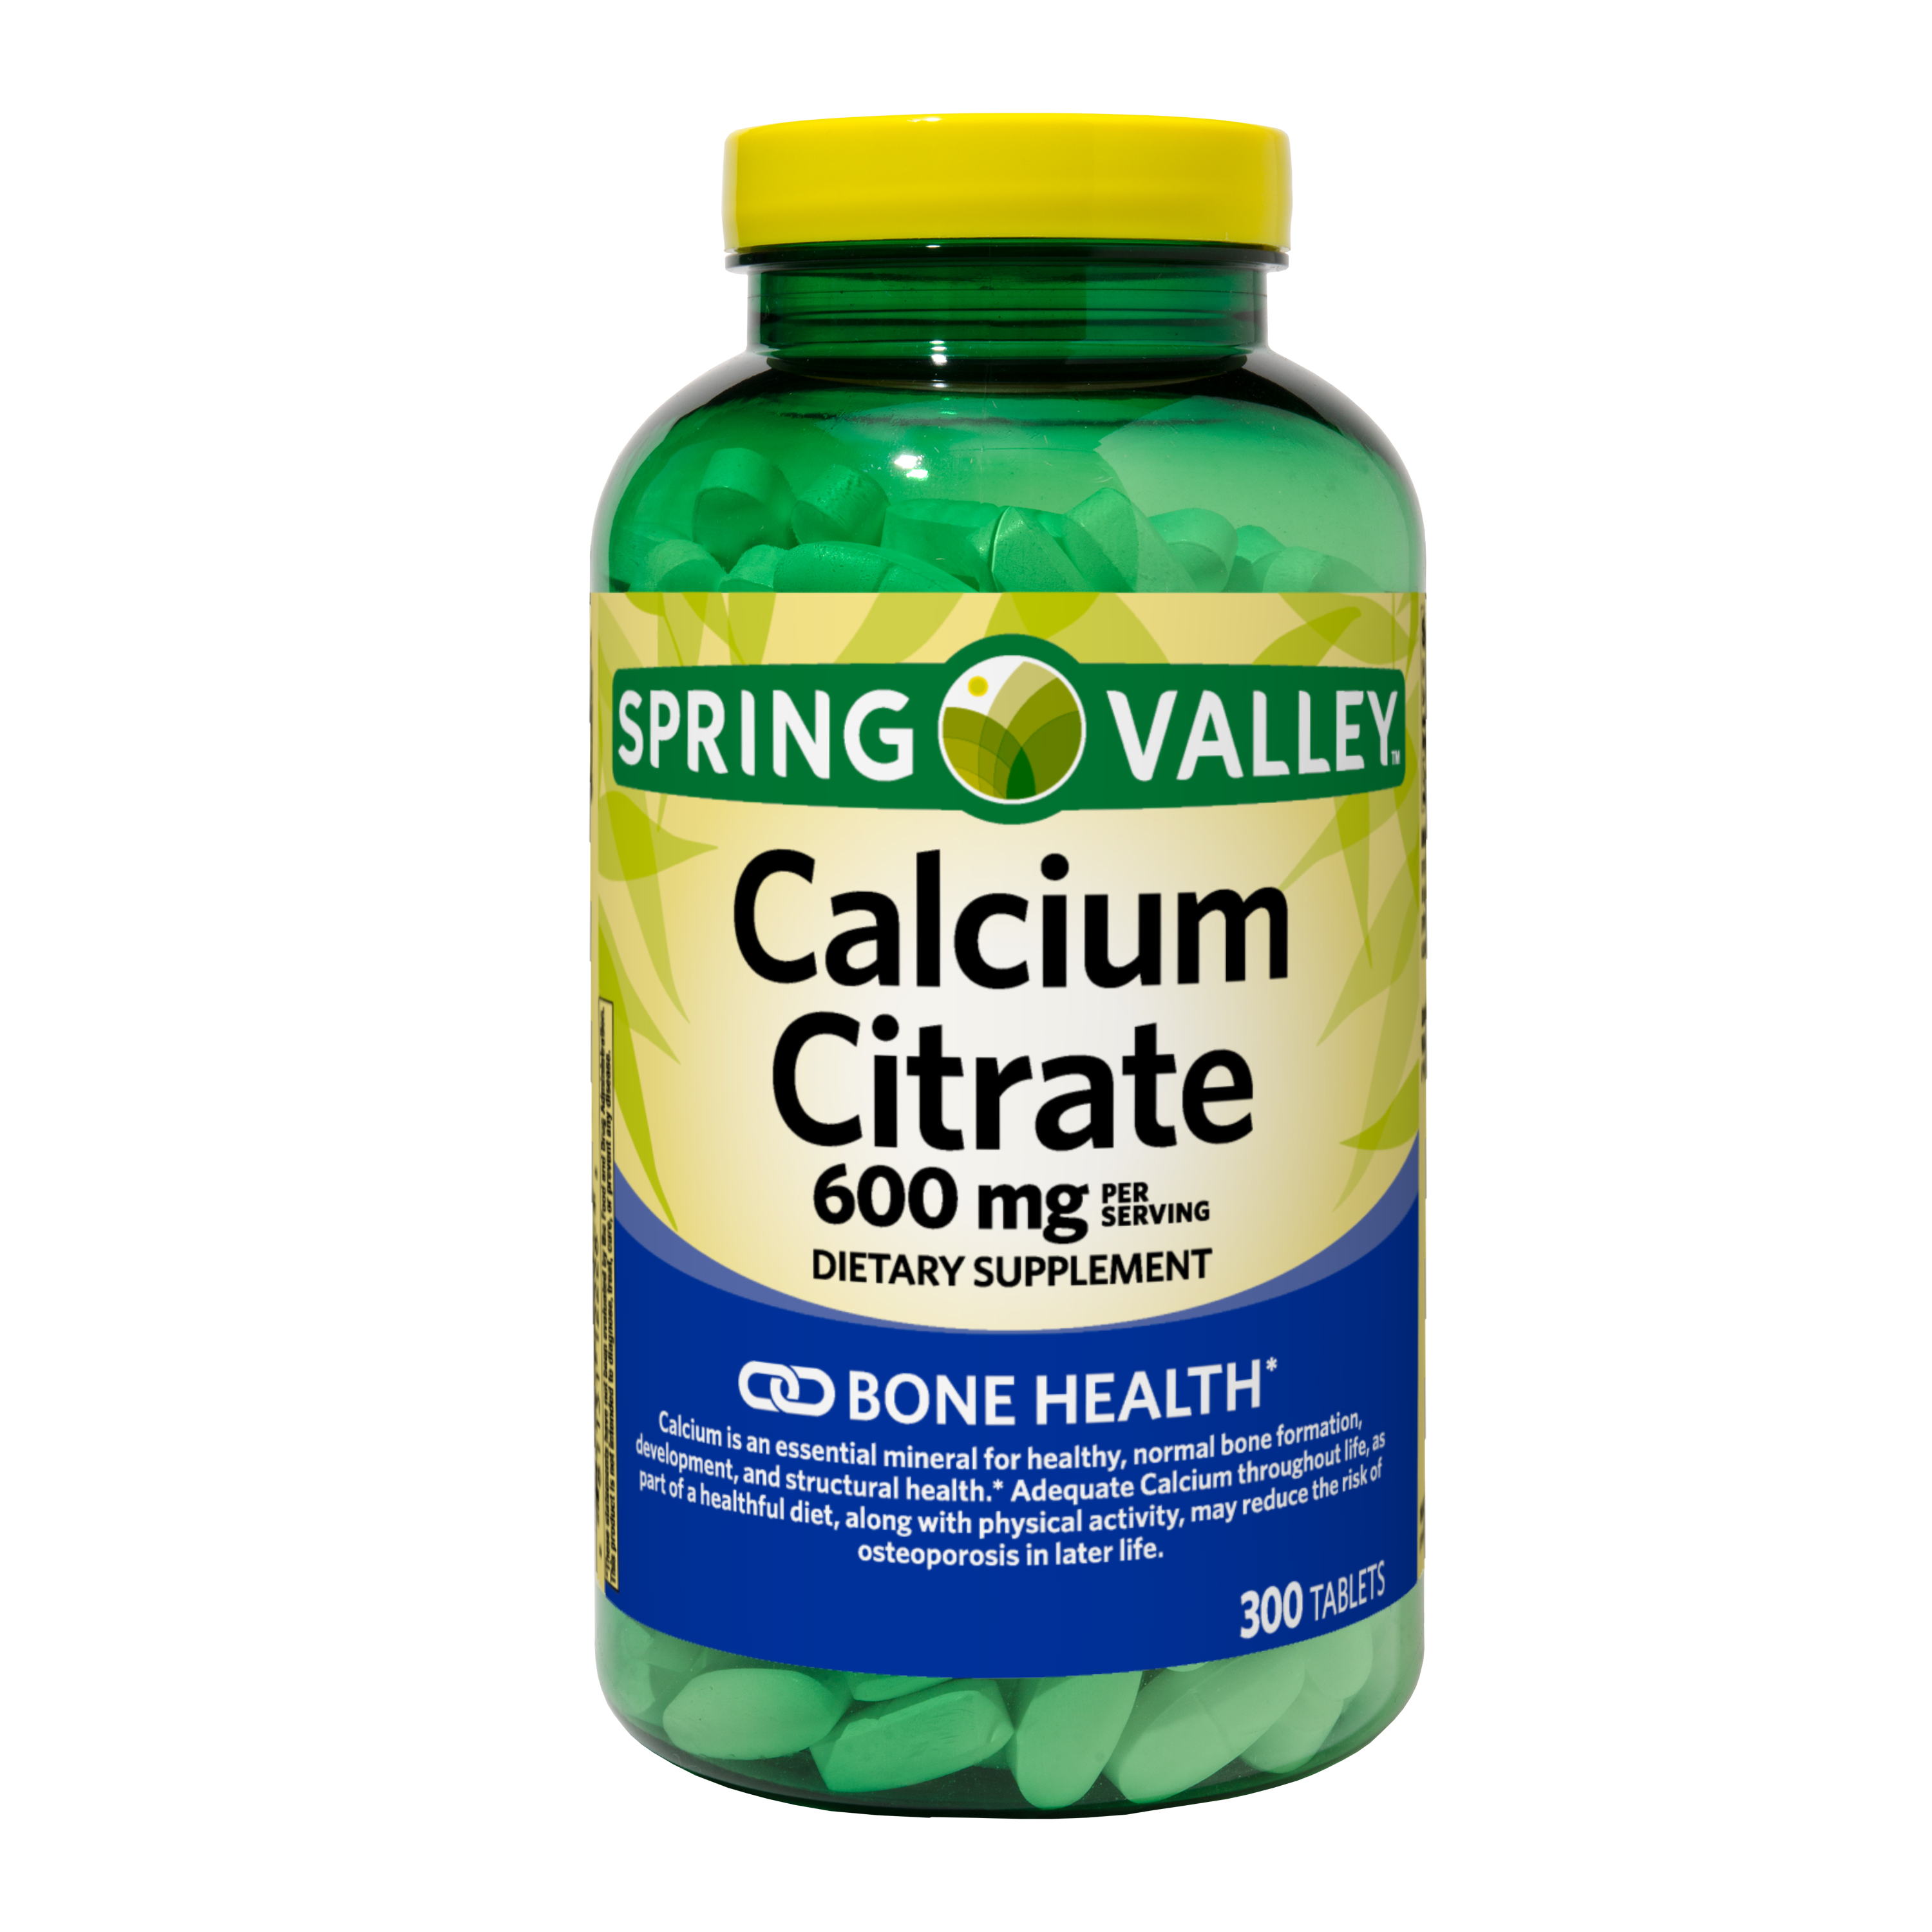 Spring Valley Calcium Citrate Tablets Dietary Supplement, 600 mg, 300 Count - image 1 of 8